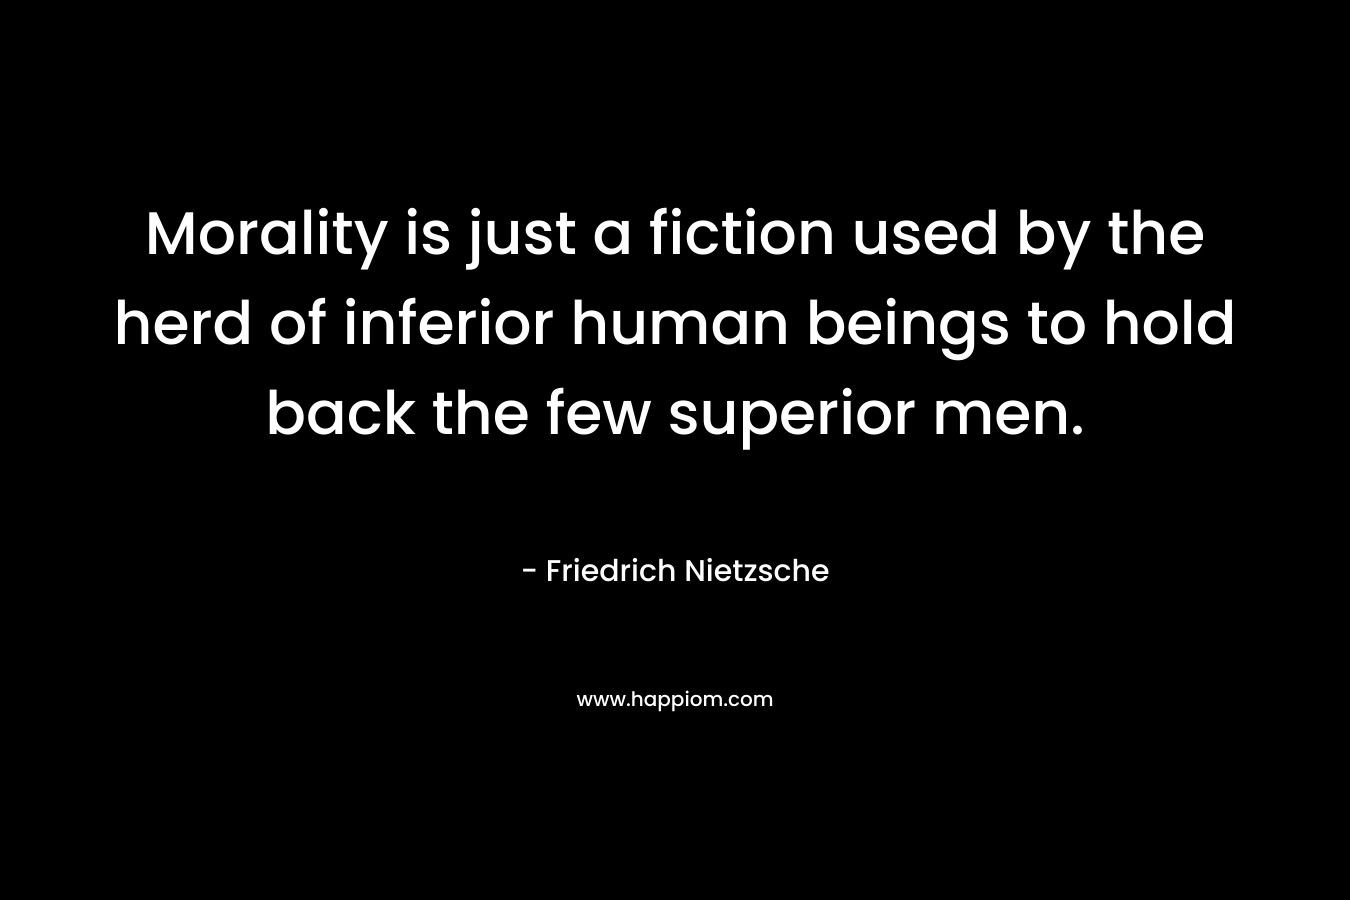 Morality is just a fiction used by the herd of inferior human beings to hold back the few superior men.